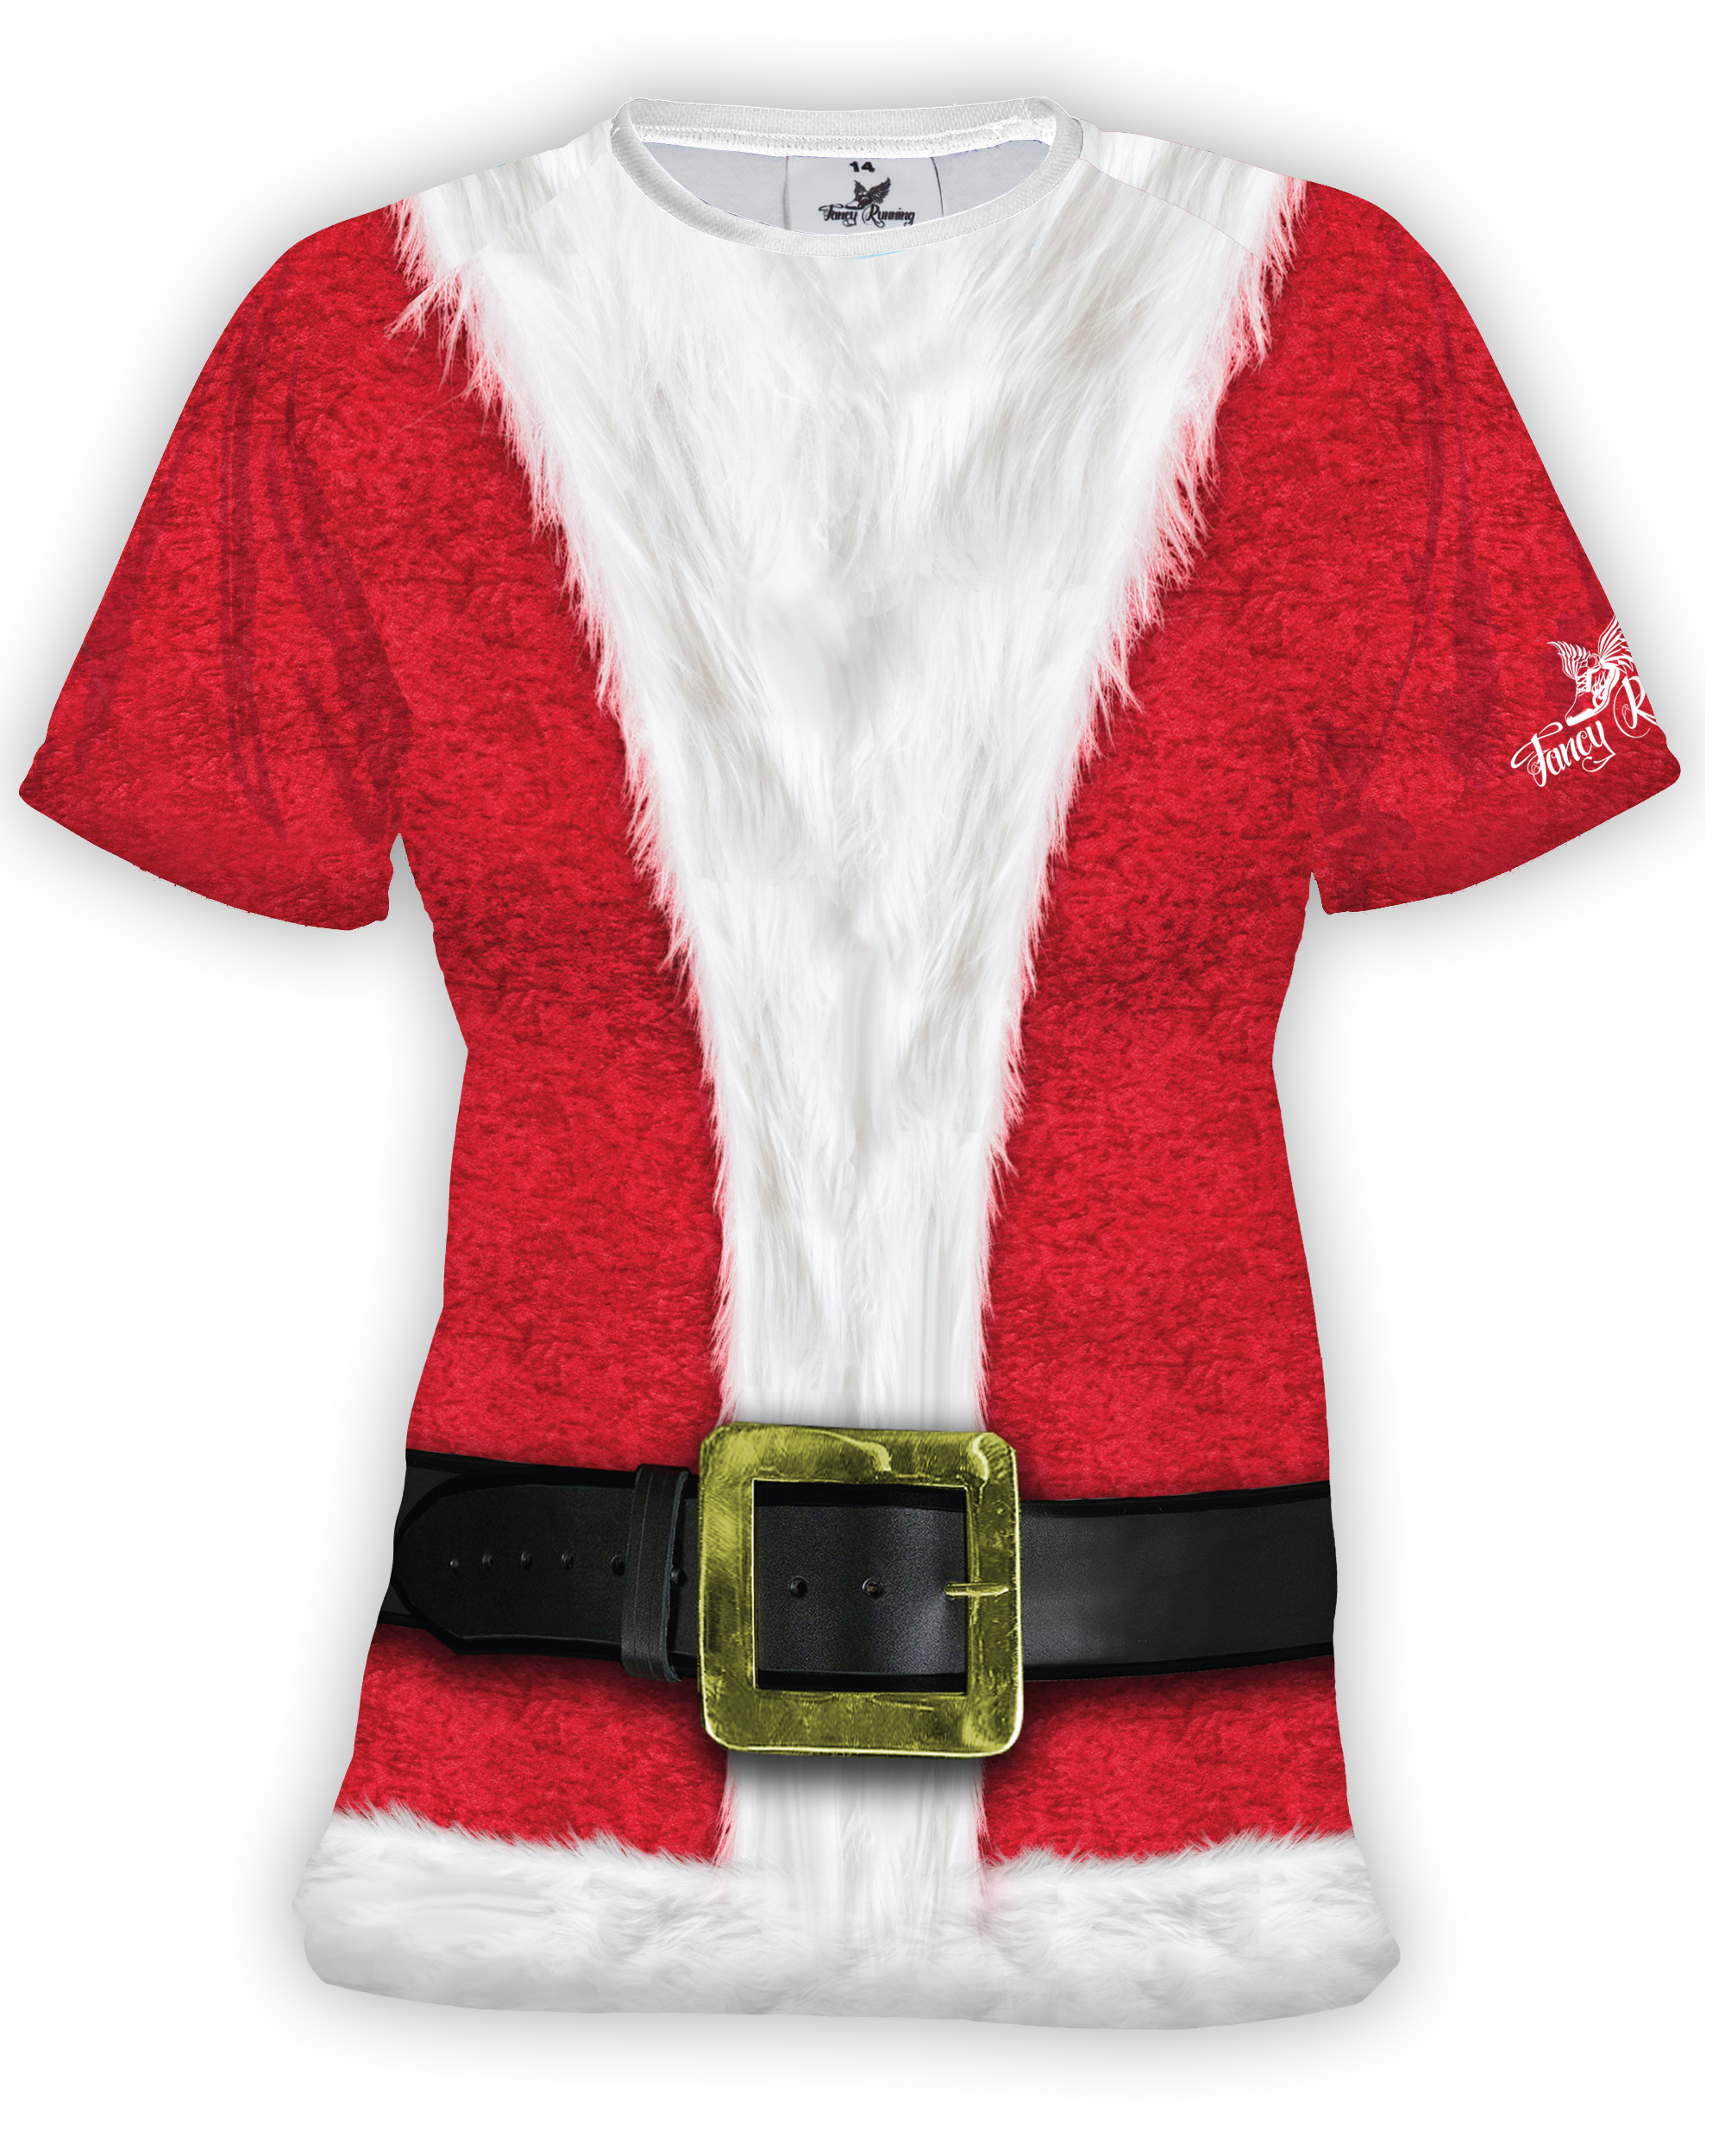 christmas running outfit